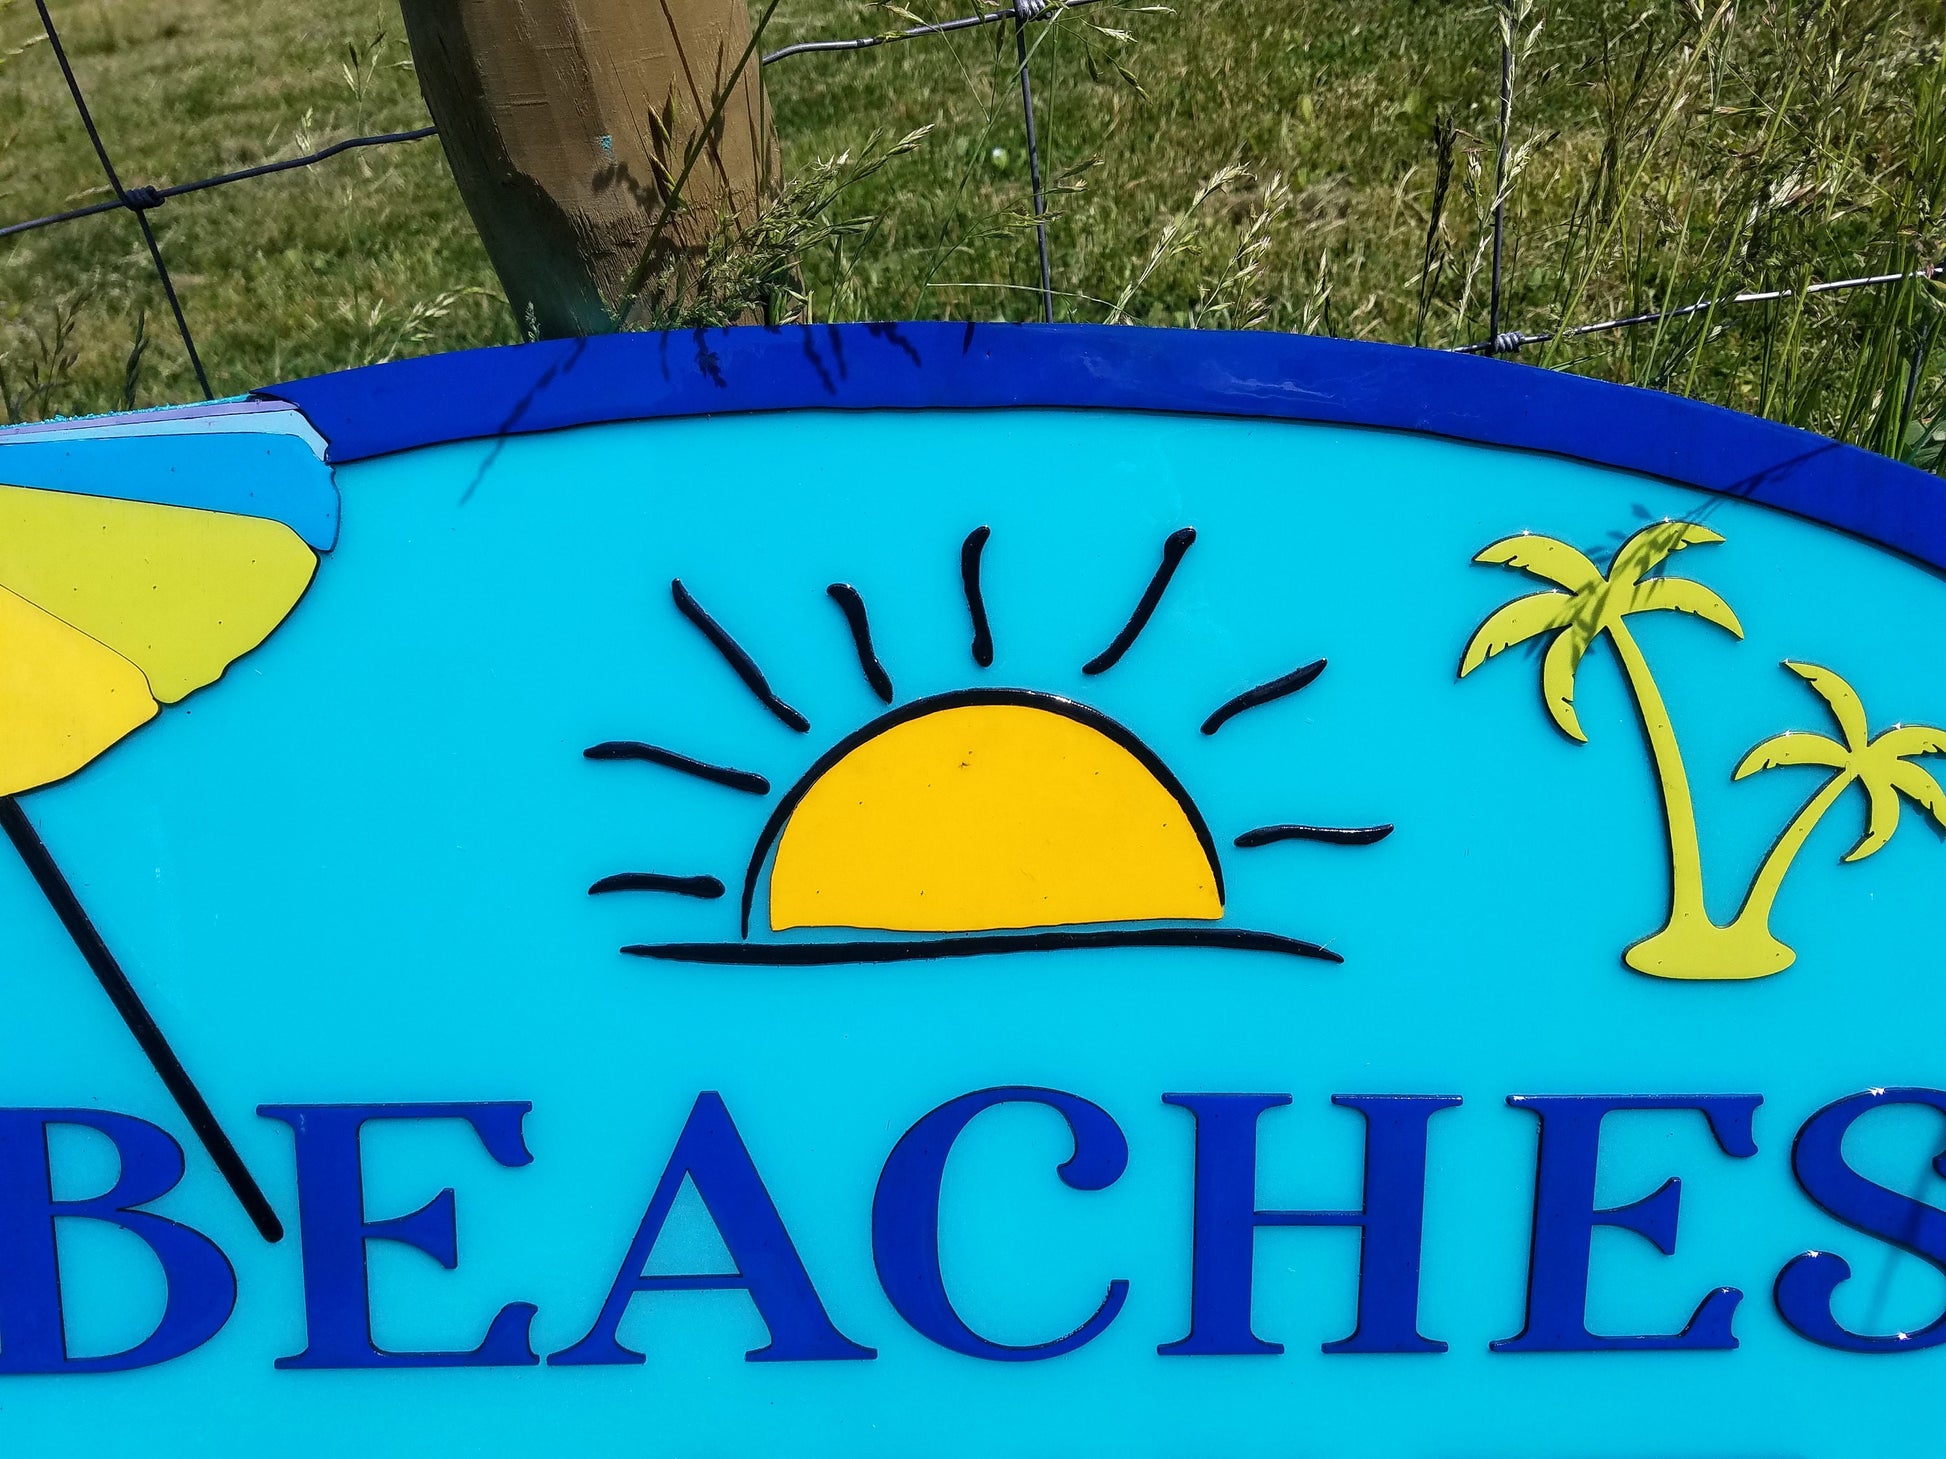 Beach House, Lake House, Pool, Fun in the Sun, Colorful, Large Custom Sign, Address Sign, Welcome Sign, Wood, Laser Cut Out, 3D